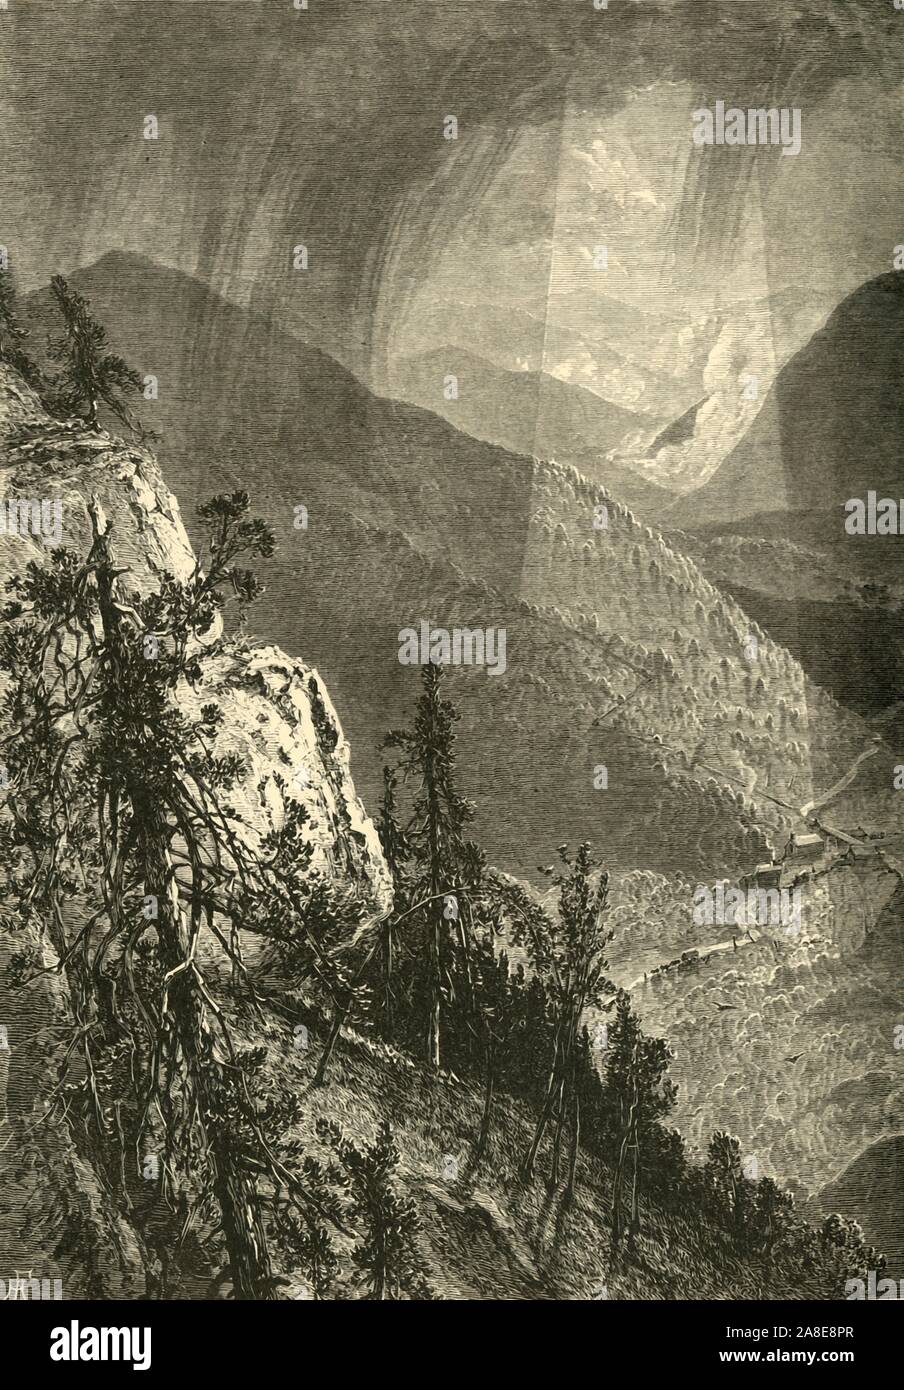 'Cumberland Gap, from Eagle Cliff', 1872. View of the pass through the Cumberland Mountains on the border of Kentucky and Virginia, USA. Covered wagons can be seen on the winding mountain road. From &quot;Picturesque America; or, The Land We Live In, A Delineation by Pen and Pencil of the Mountains, Rivers, Lakes...with Illustrations on Steel and Wood by Eminent American Artists&quot; Vol. I, edited by William Cullen Bryant. [D. Appleton and Company, New York, 1872] Stock Photo